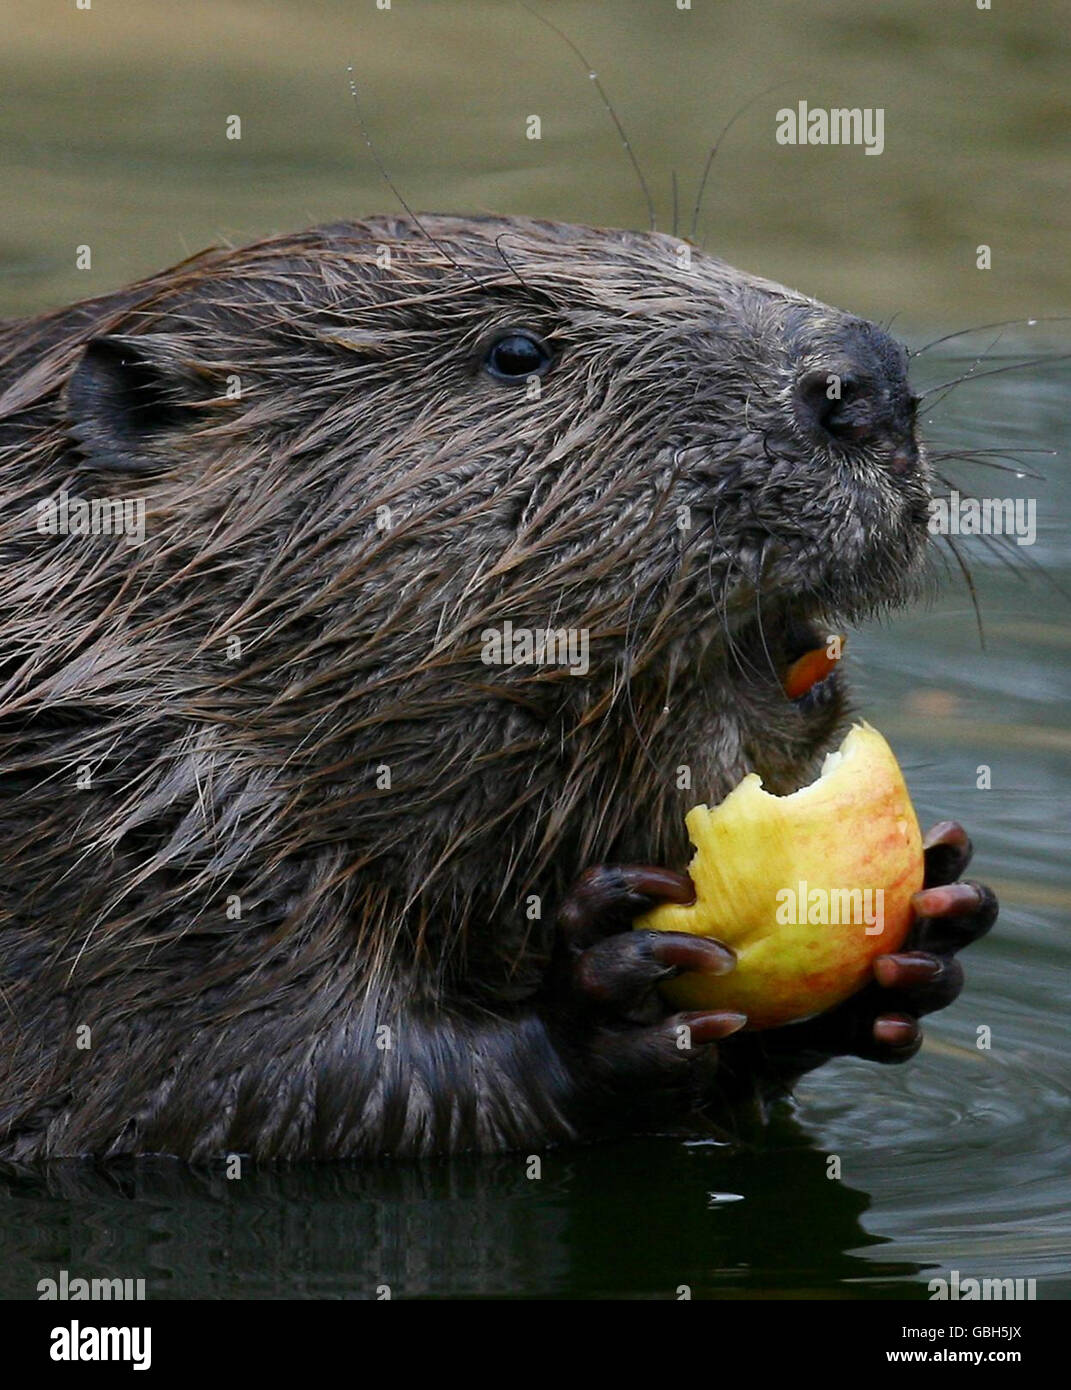 A Beaver eats an apple in its enclosure at the Wildwood Trust in Herne Bay, Kent, as details of a Beaver Reintroduction Feasibility study into reintroducing the European Beaver into England is announced. Stock Photo